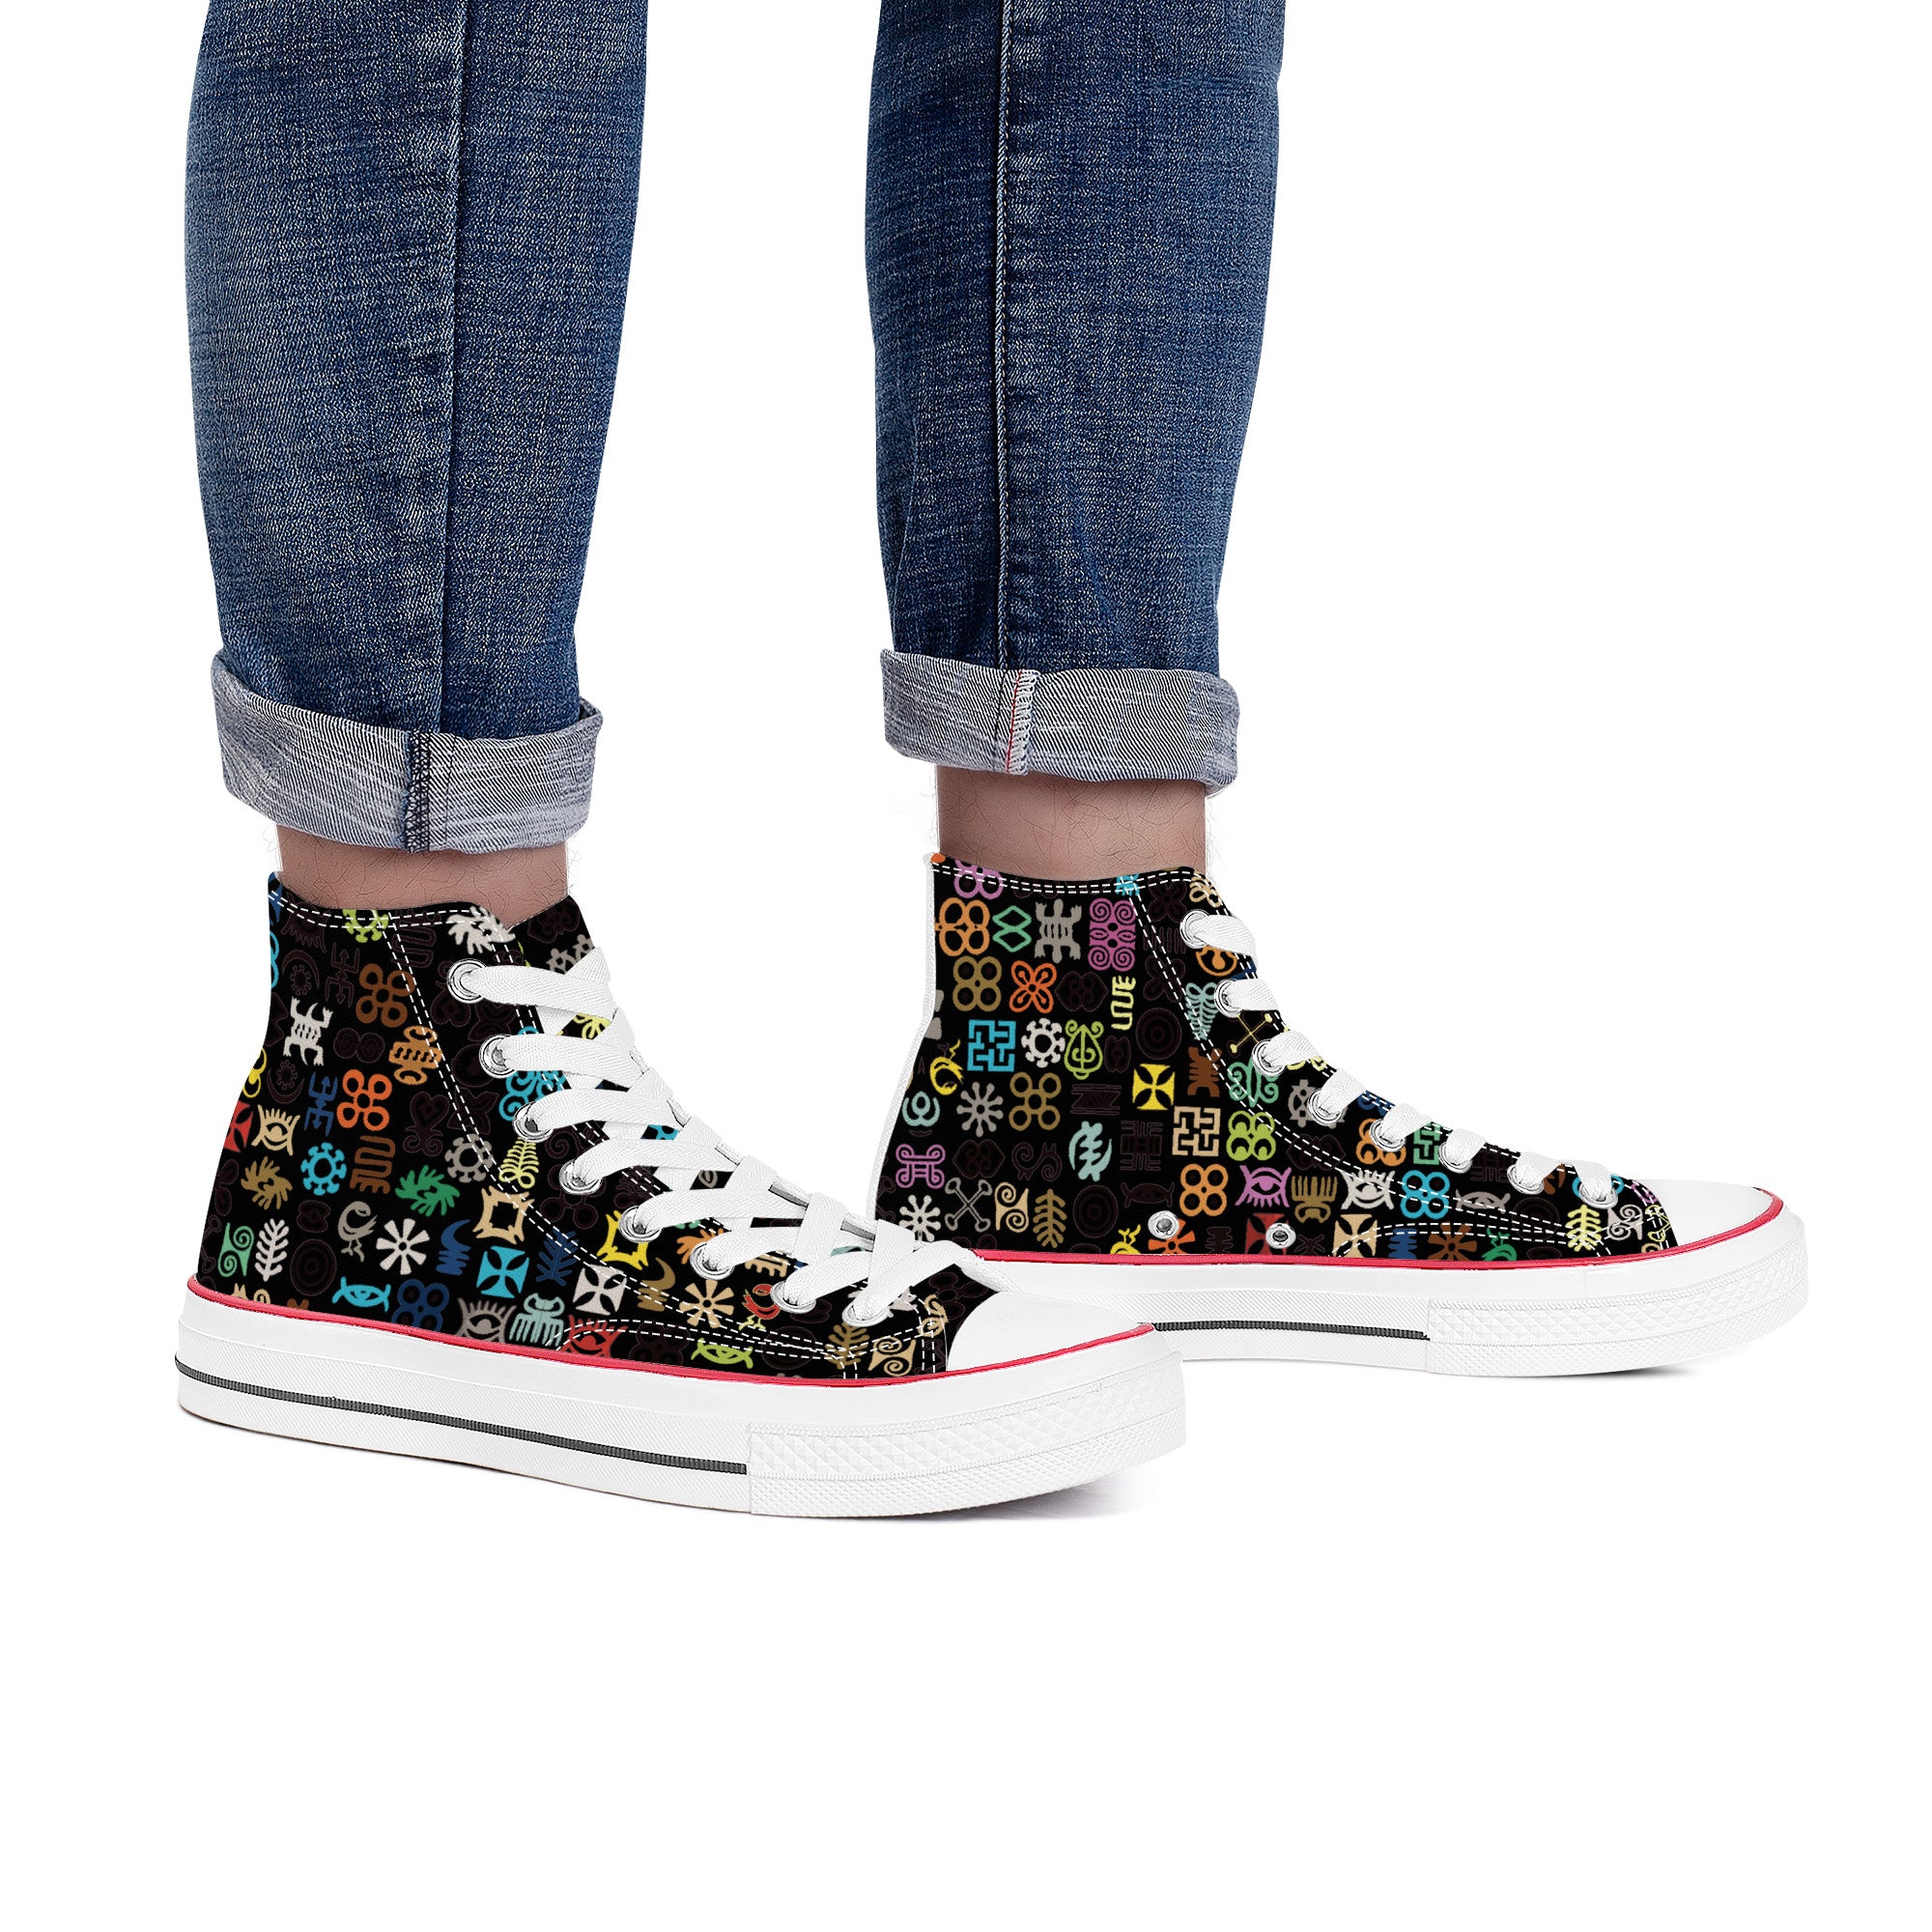 ADINKRA HIGH TOP CANVAS SHOES - BLACK SNEAKERS WITH MULTICOLOR PRINT